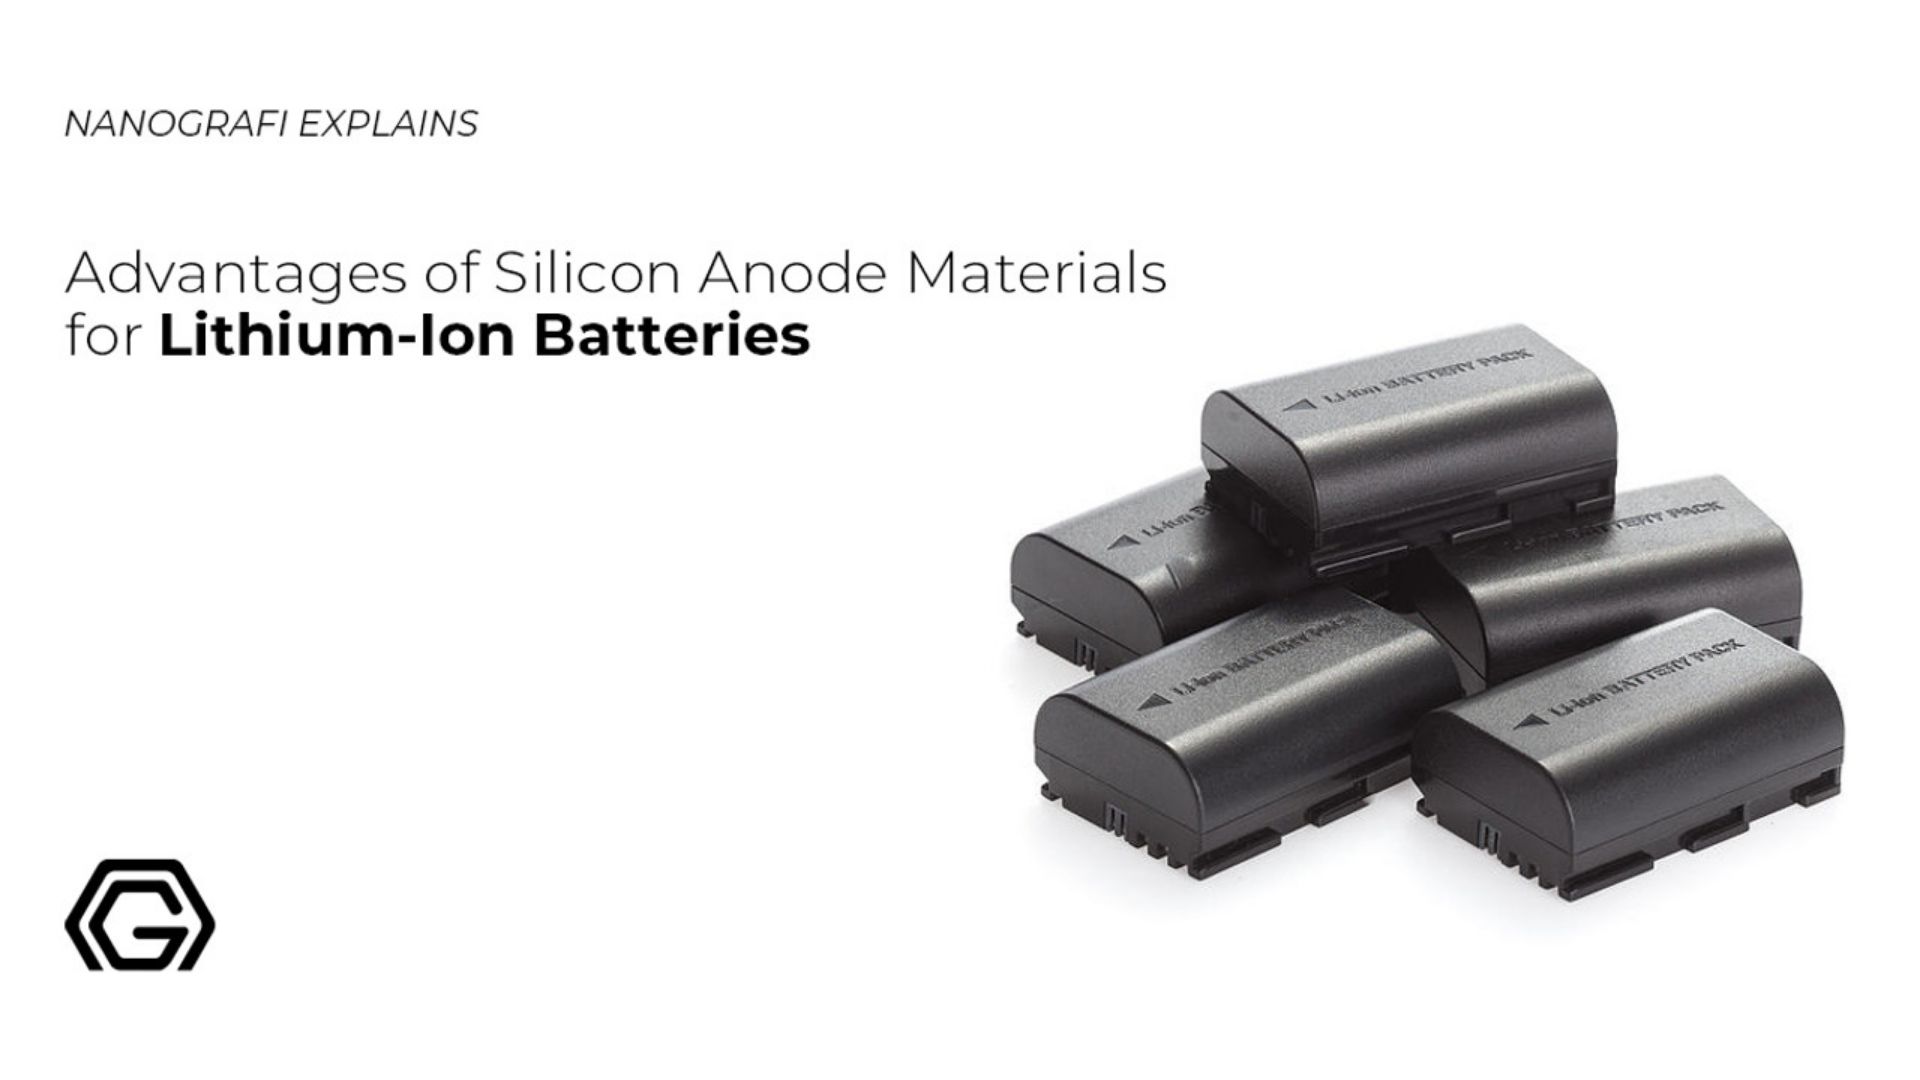 Advantages of silicon anode materials for lithium-ion batteries